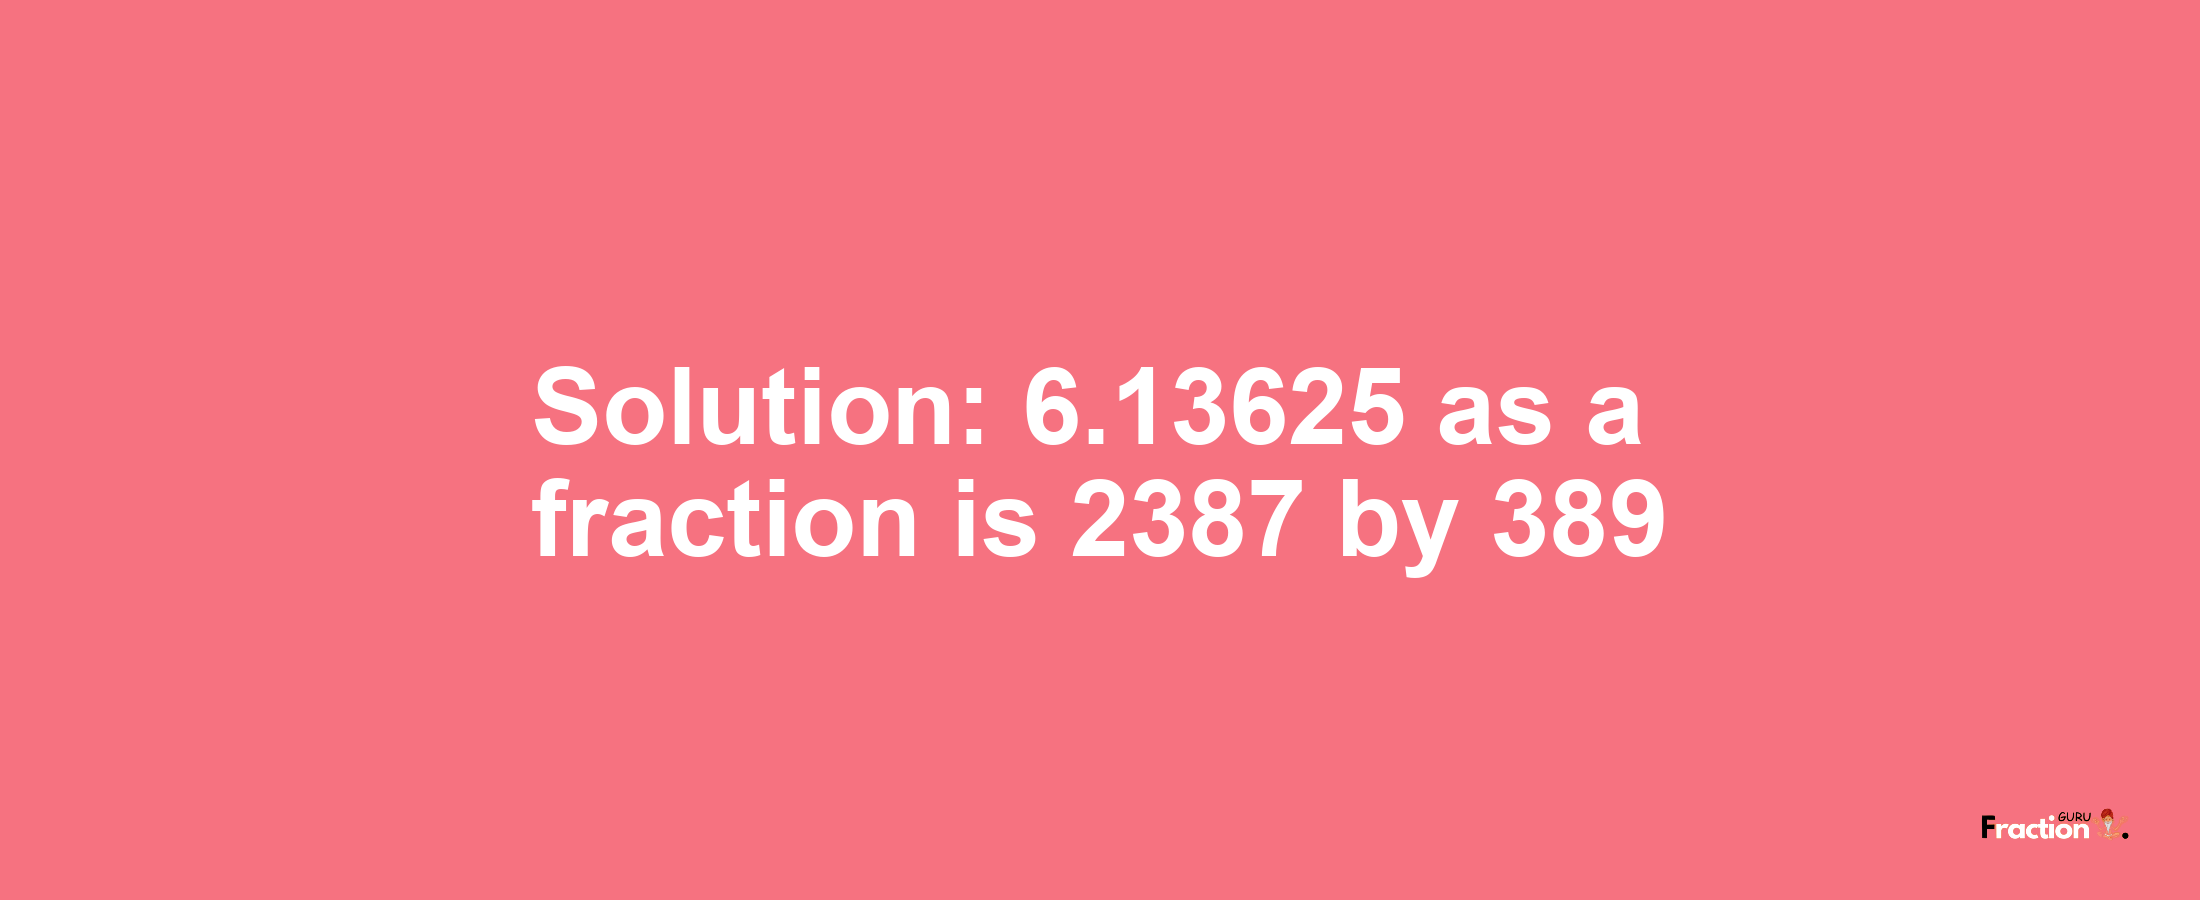 Solution:6.13625 as a fraction is 2387/389